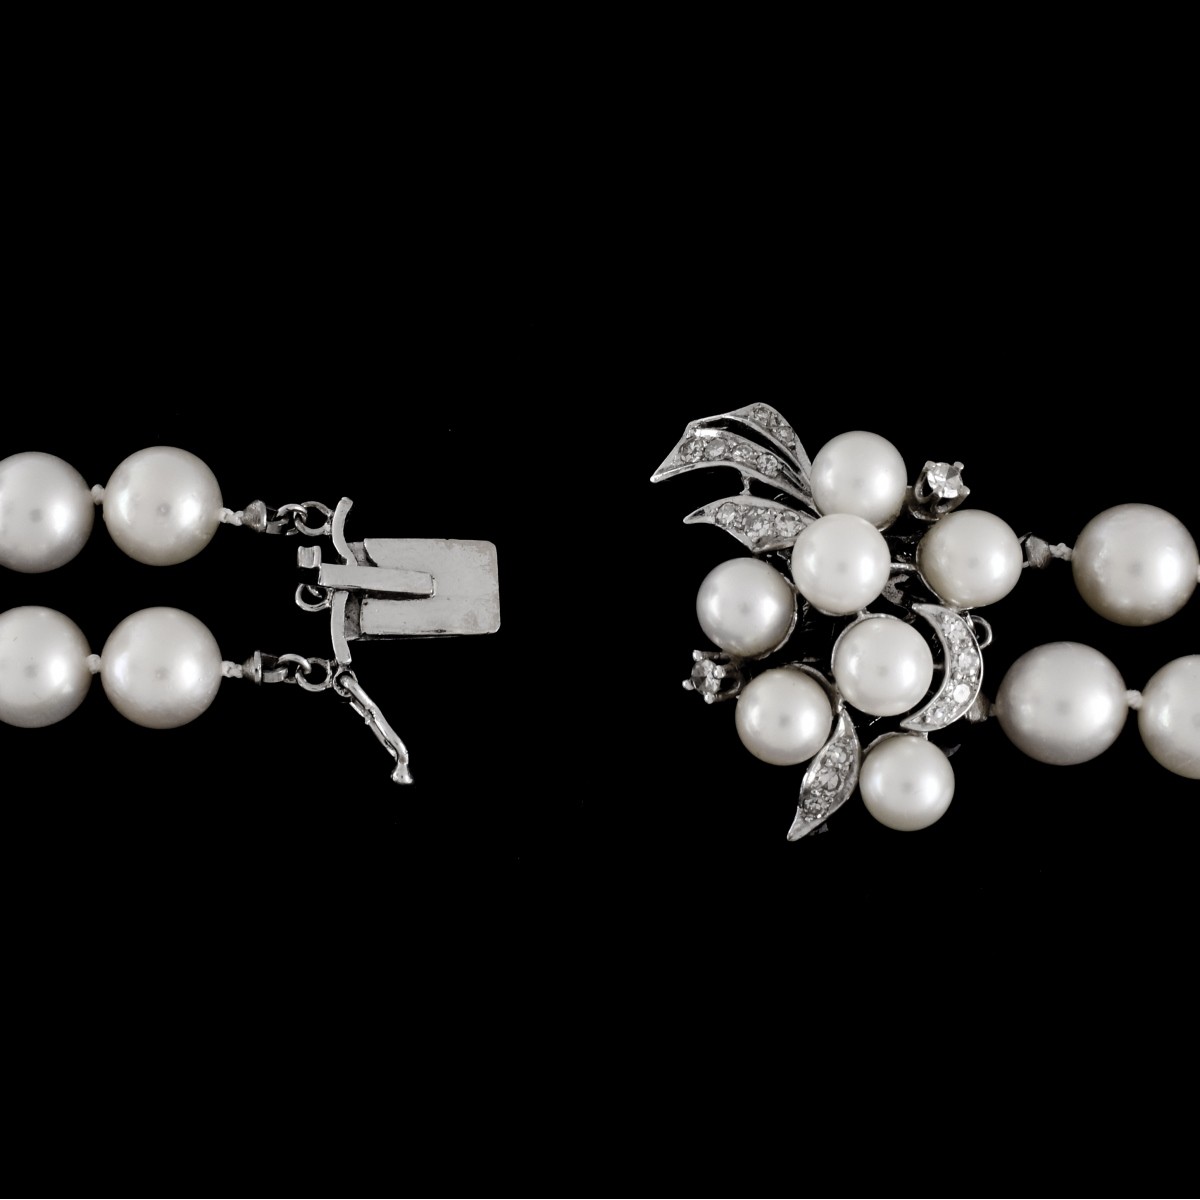 Pearl and Diamond Necklace and Earrings - Image 2 of 3